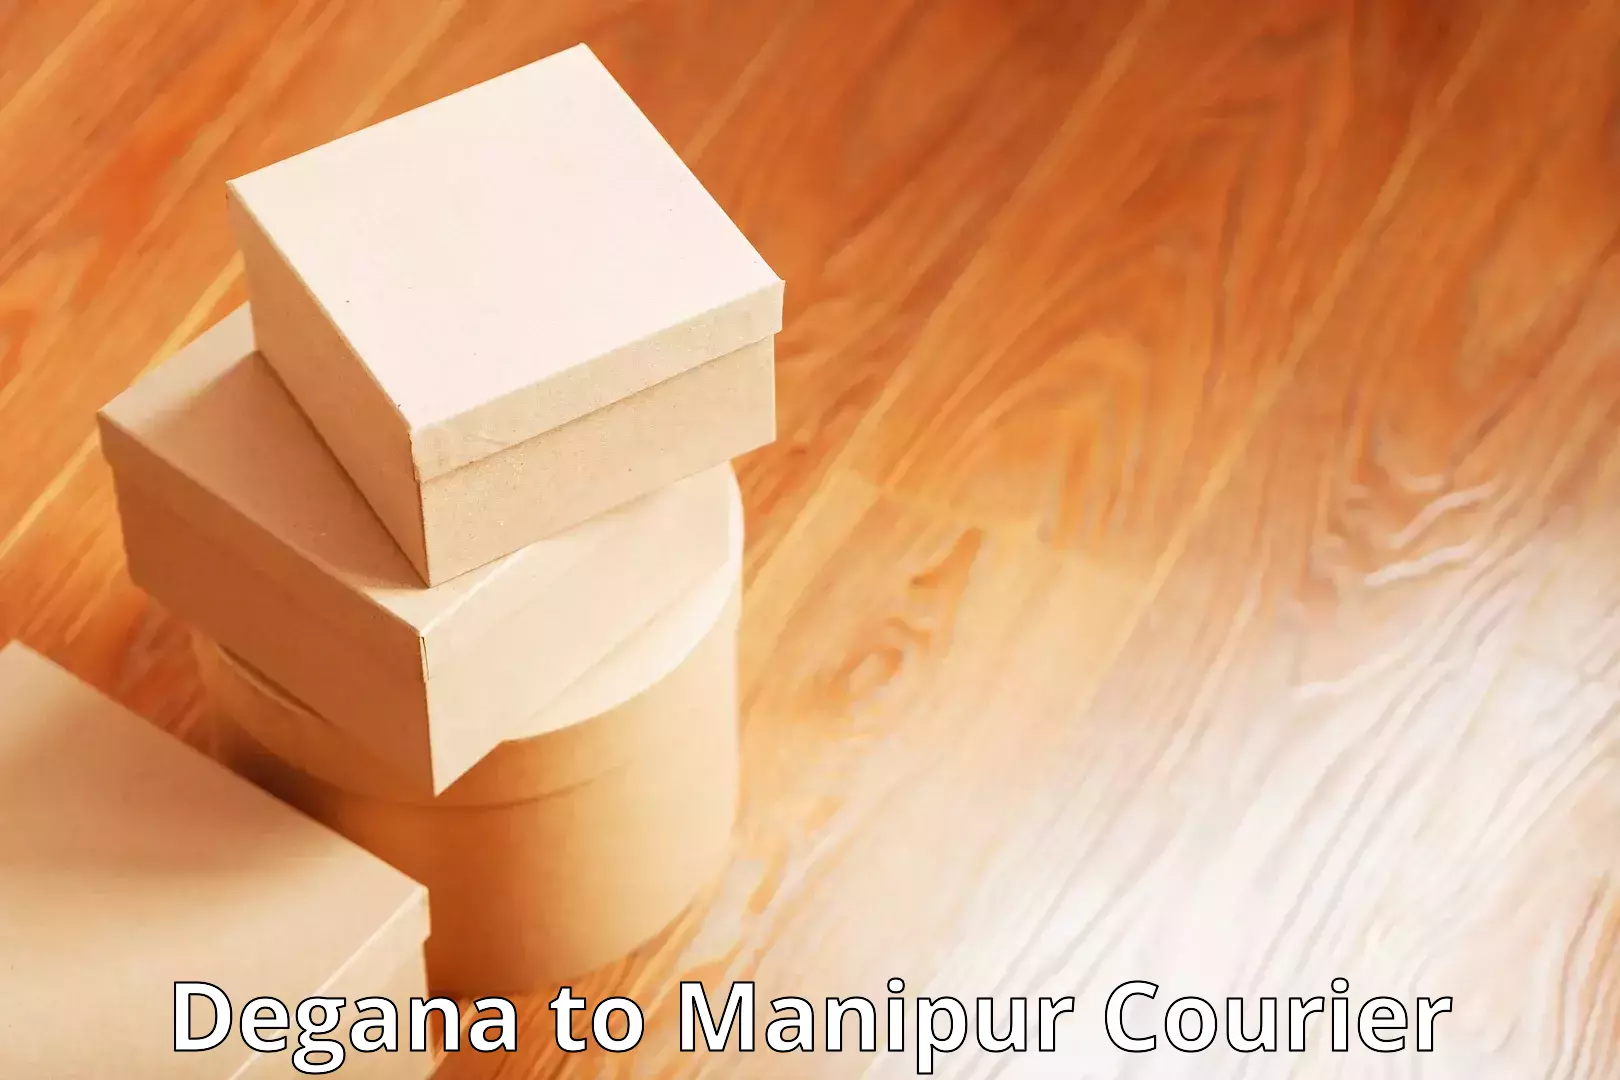 Global shipping solutions Degana to Manipur